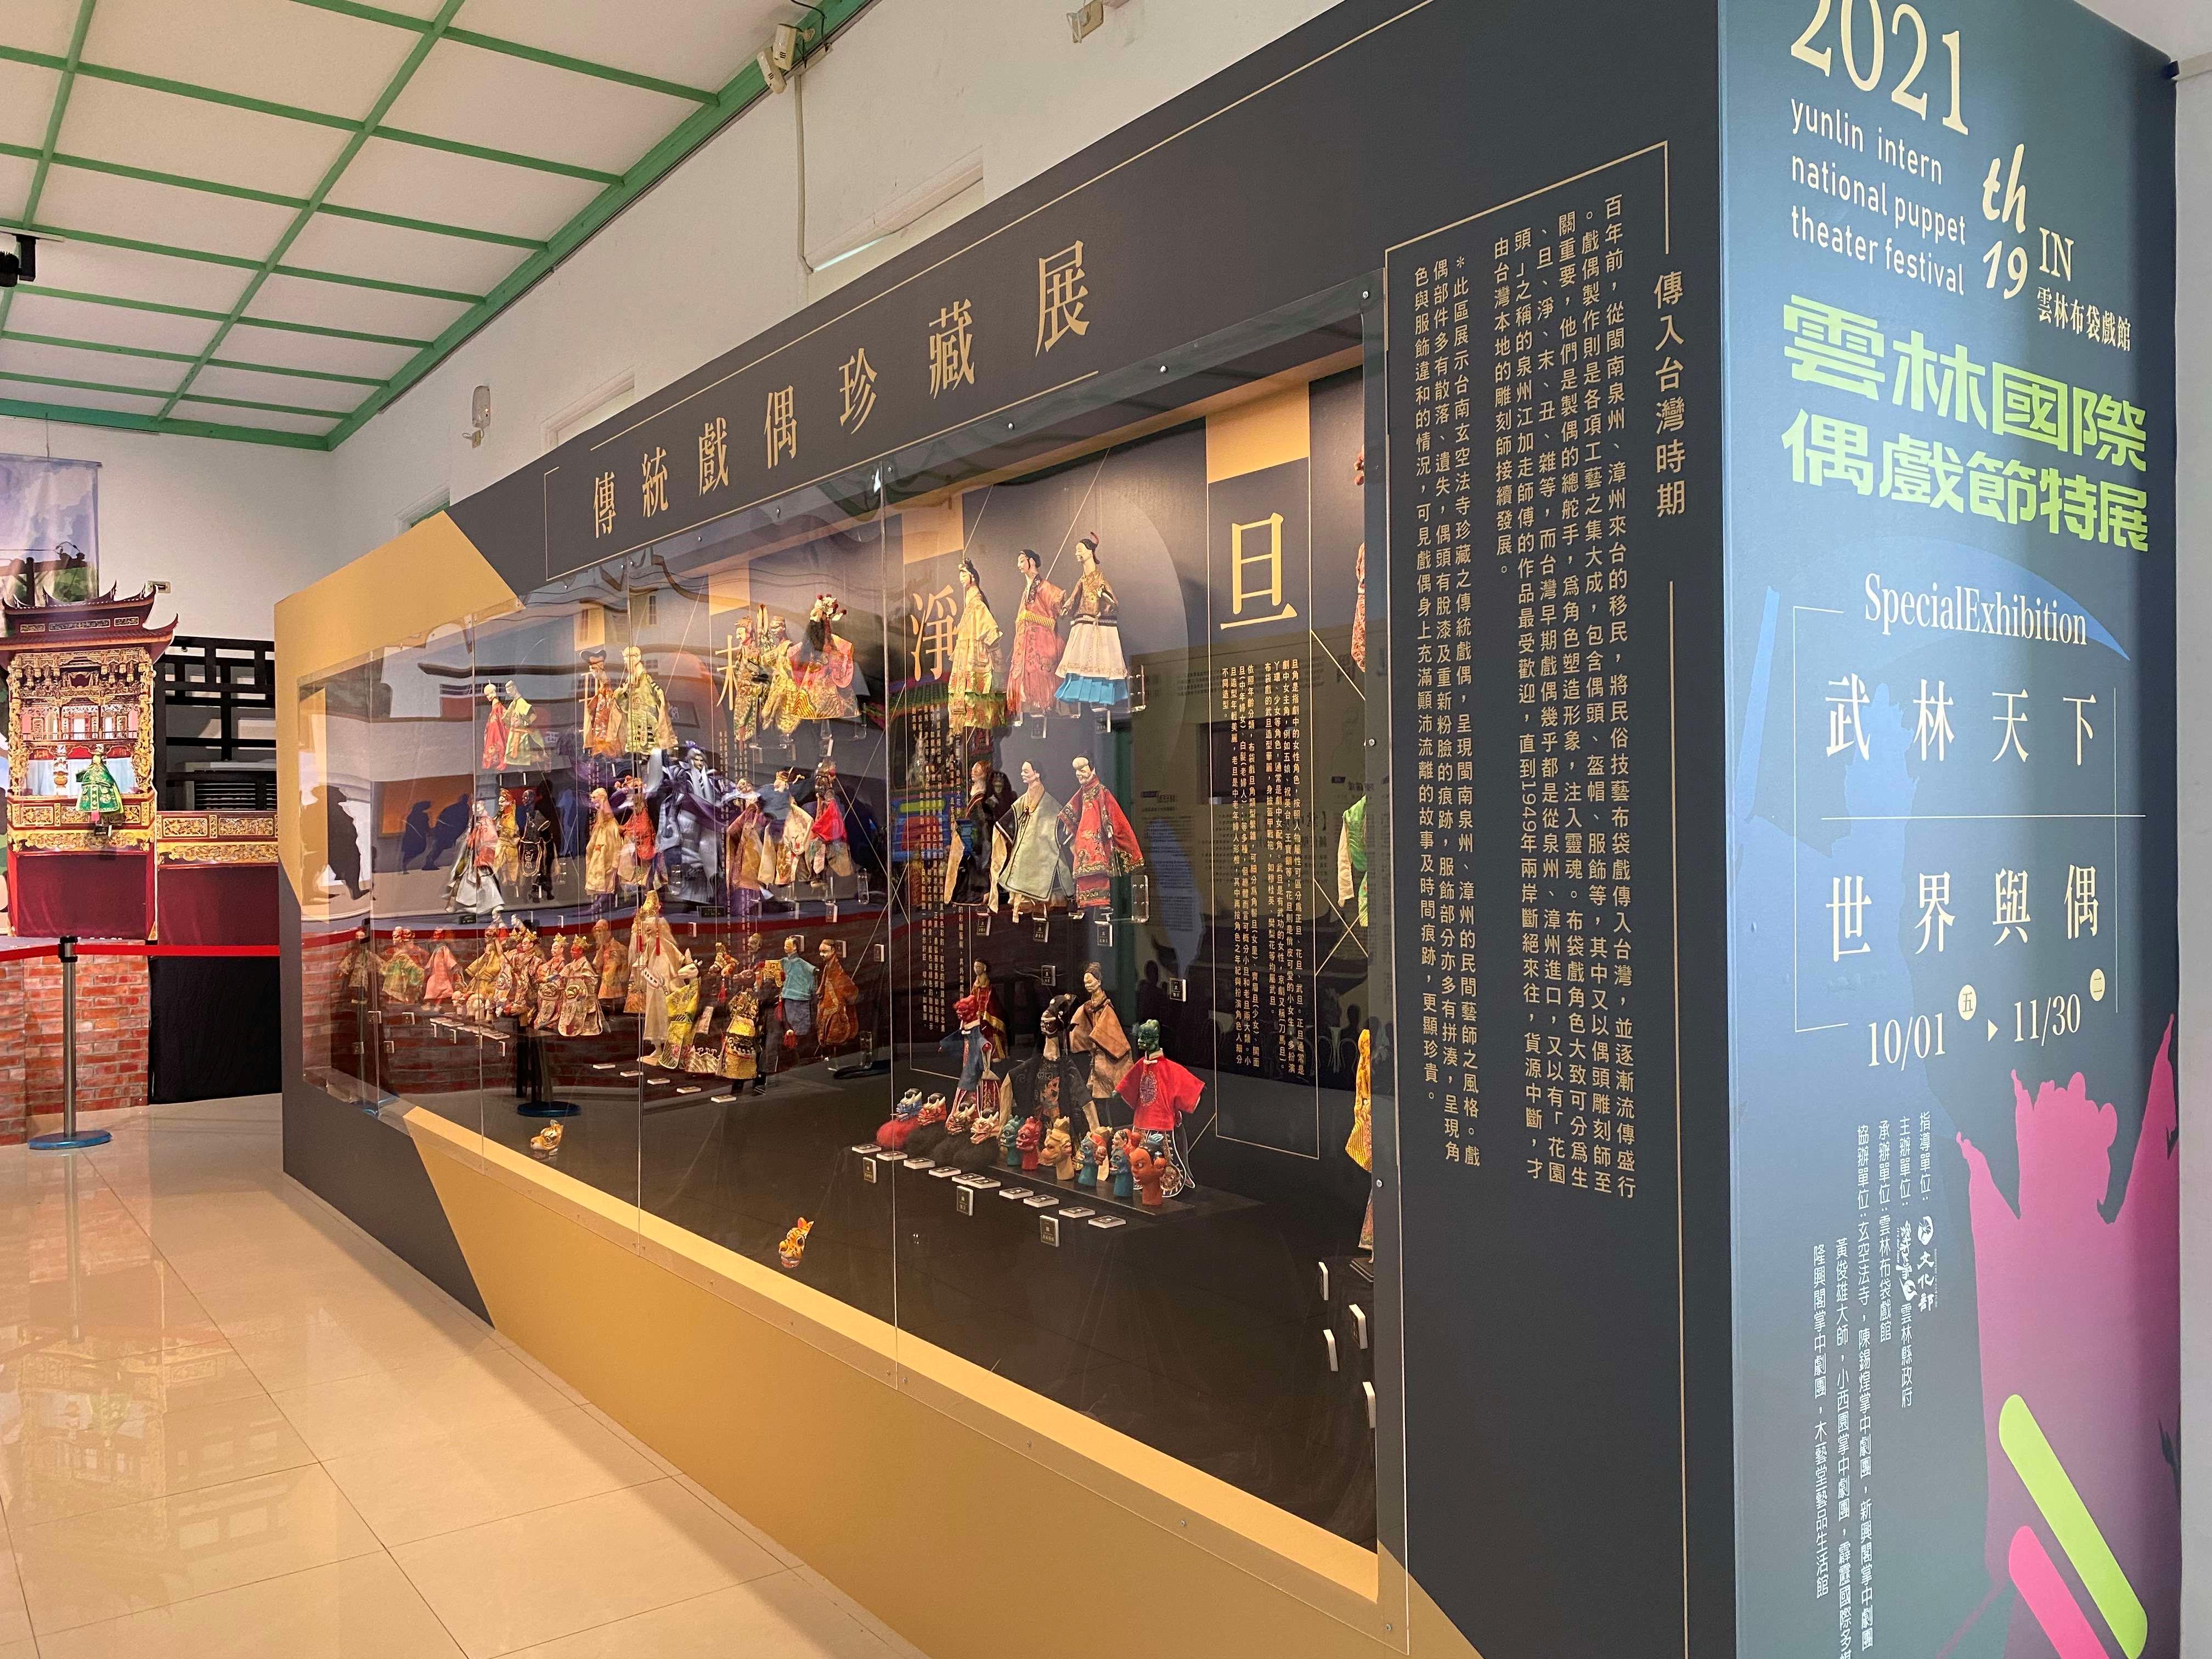 For the first time, the event adopts both virtual and physical competitions and it includes exciting content. (Photo / Provided by the Yunlin County Government)